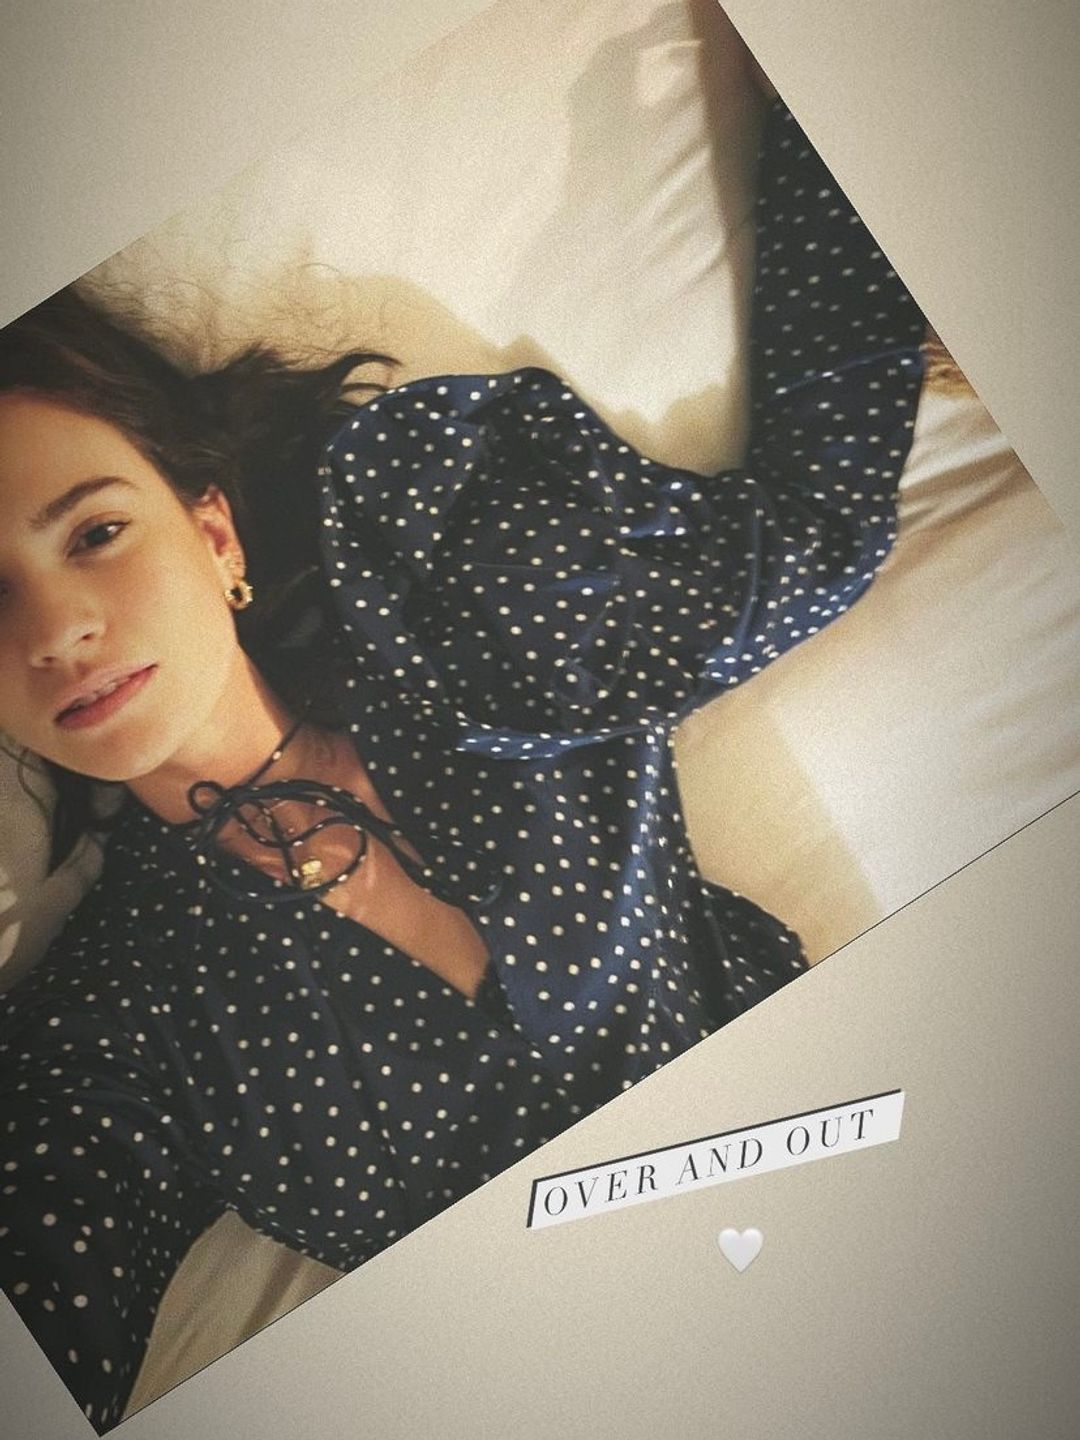 Lily James opted for a polka-dot blouse by Mango 